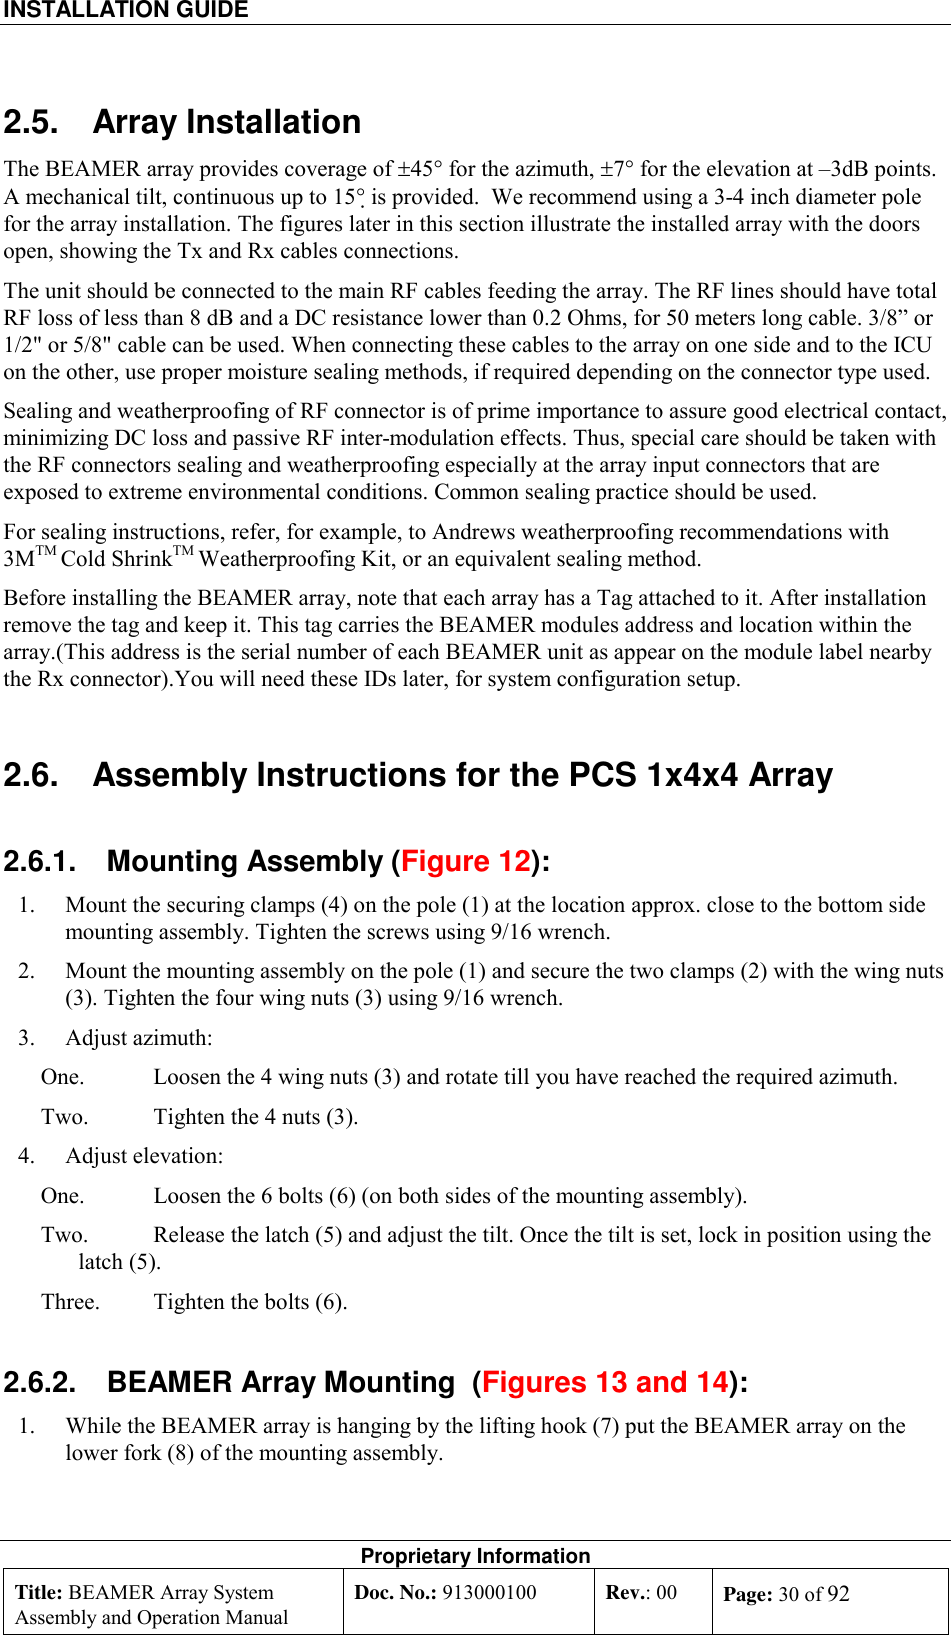 INSTALLATION GUIDE    Proprietary Information Title: BEAMER Array System Assembly and Operation Manual Doc. No.: 913000100  Rev.: 00  Page: 30 of 92  2.5. Array Installation The BEAMER array provides coverage of ±45° for the azimuth, ±7° for the elevation at –3dB points. A mechanical tilt, continuous up to 15° is provided.  We recommend using a 3-4 inch diameter pole for the array installation. The figures later in this section illustrate the installed array with the doors open, showing the Tx and Rx cables connections.  The unit should be connected to the main RF cables feeding the array. The RF lines should have total RF loss of less than 8 dB and a DC resistance lower than 0.2 Ohms, for 50 meters long cable. 3/8” or 1/2&quot; or 5/8&quot; cable can be used. When connecting these cables to the array on one side and to the ICU on the other, use proper moisture sealing methods, if required depending on the connector type used.  Sealing and weatherproofing of RF connector is of prime importance to assure good electrical contact, minimizing DC loss and passive RF inter-modulation effects. Thus, special care should be taken with the RF connectors sealing and weatherproofing especially at the array input connectors that are exposed to extreme environmental conditions. Common sealing practice should be used. For sealing instructions, refer, for example, to Andrews weatherproofing recommendations with 3MTM Cold ShrinkTM Weatherproofing Kit, or an equivalent sealing method.  Before installing the BEAMER array, note that each array has a Tag attached to it. After installation remove the tag and keep it. This tag carries the BEAMER modules address and location within the array.(This address is the serial number of each BEAMER unit as appear on the module label nearby the Rx connector).You will need these IDs later, for system configuration setup. 2.6.  Assembly Instructions for the PCS 1x4x4 Array 2.6.1.  Mounting Assembly (Figure 12): 1.  Mount the securing clamps (4) on the pole (1) at the location approx. close to the bottom side mounting assembly. Tighten the screws using 9/16 wrench. 2.  Mount the mounting assembly on the pole (1) and secure the two clamps (2) with the wing nuts (3). Tighten the four wing nuts (3) using 9/16 wrench. 3. Adjust azimuth: One.  Loosen the 4 wing nuts (3) and rotate till you have reached the required azimuth. Two.  Tighten the 4 nuts (3). 4. Adjust elevation: One.  Loosen the 6 bolts (6) (on both sides of the mounting assembly). Two.  Release the latch (5) and adjust the tilt. Once the tilt is set, lock in position using the latch (5). Three.  Tighten the bolts (6). 2.6.2.  BEAMER Array Mounting  (Figures 13 and 14): 1.  While the BEAMER array is hanging by the lifting hook (7) put the BEAMER array on the lower fork (8) of the mounting assembly. 